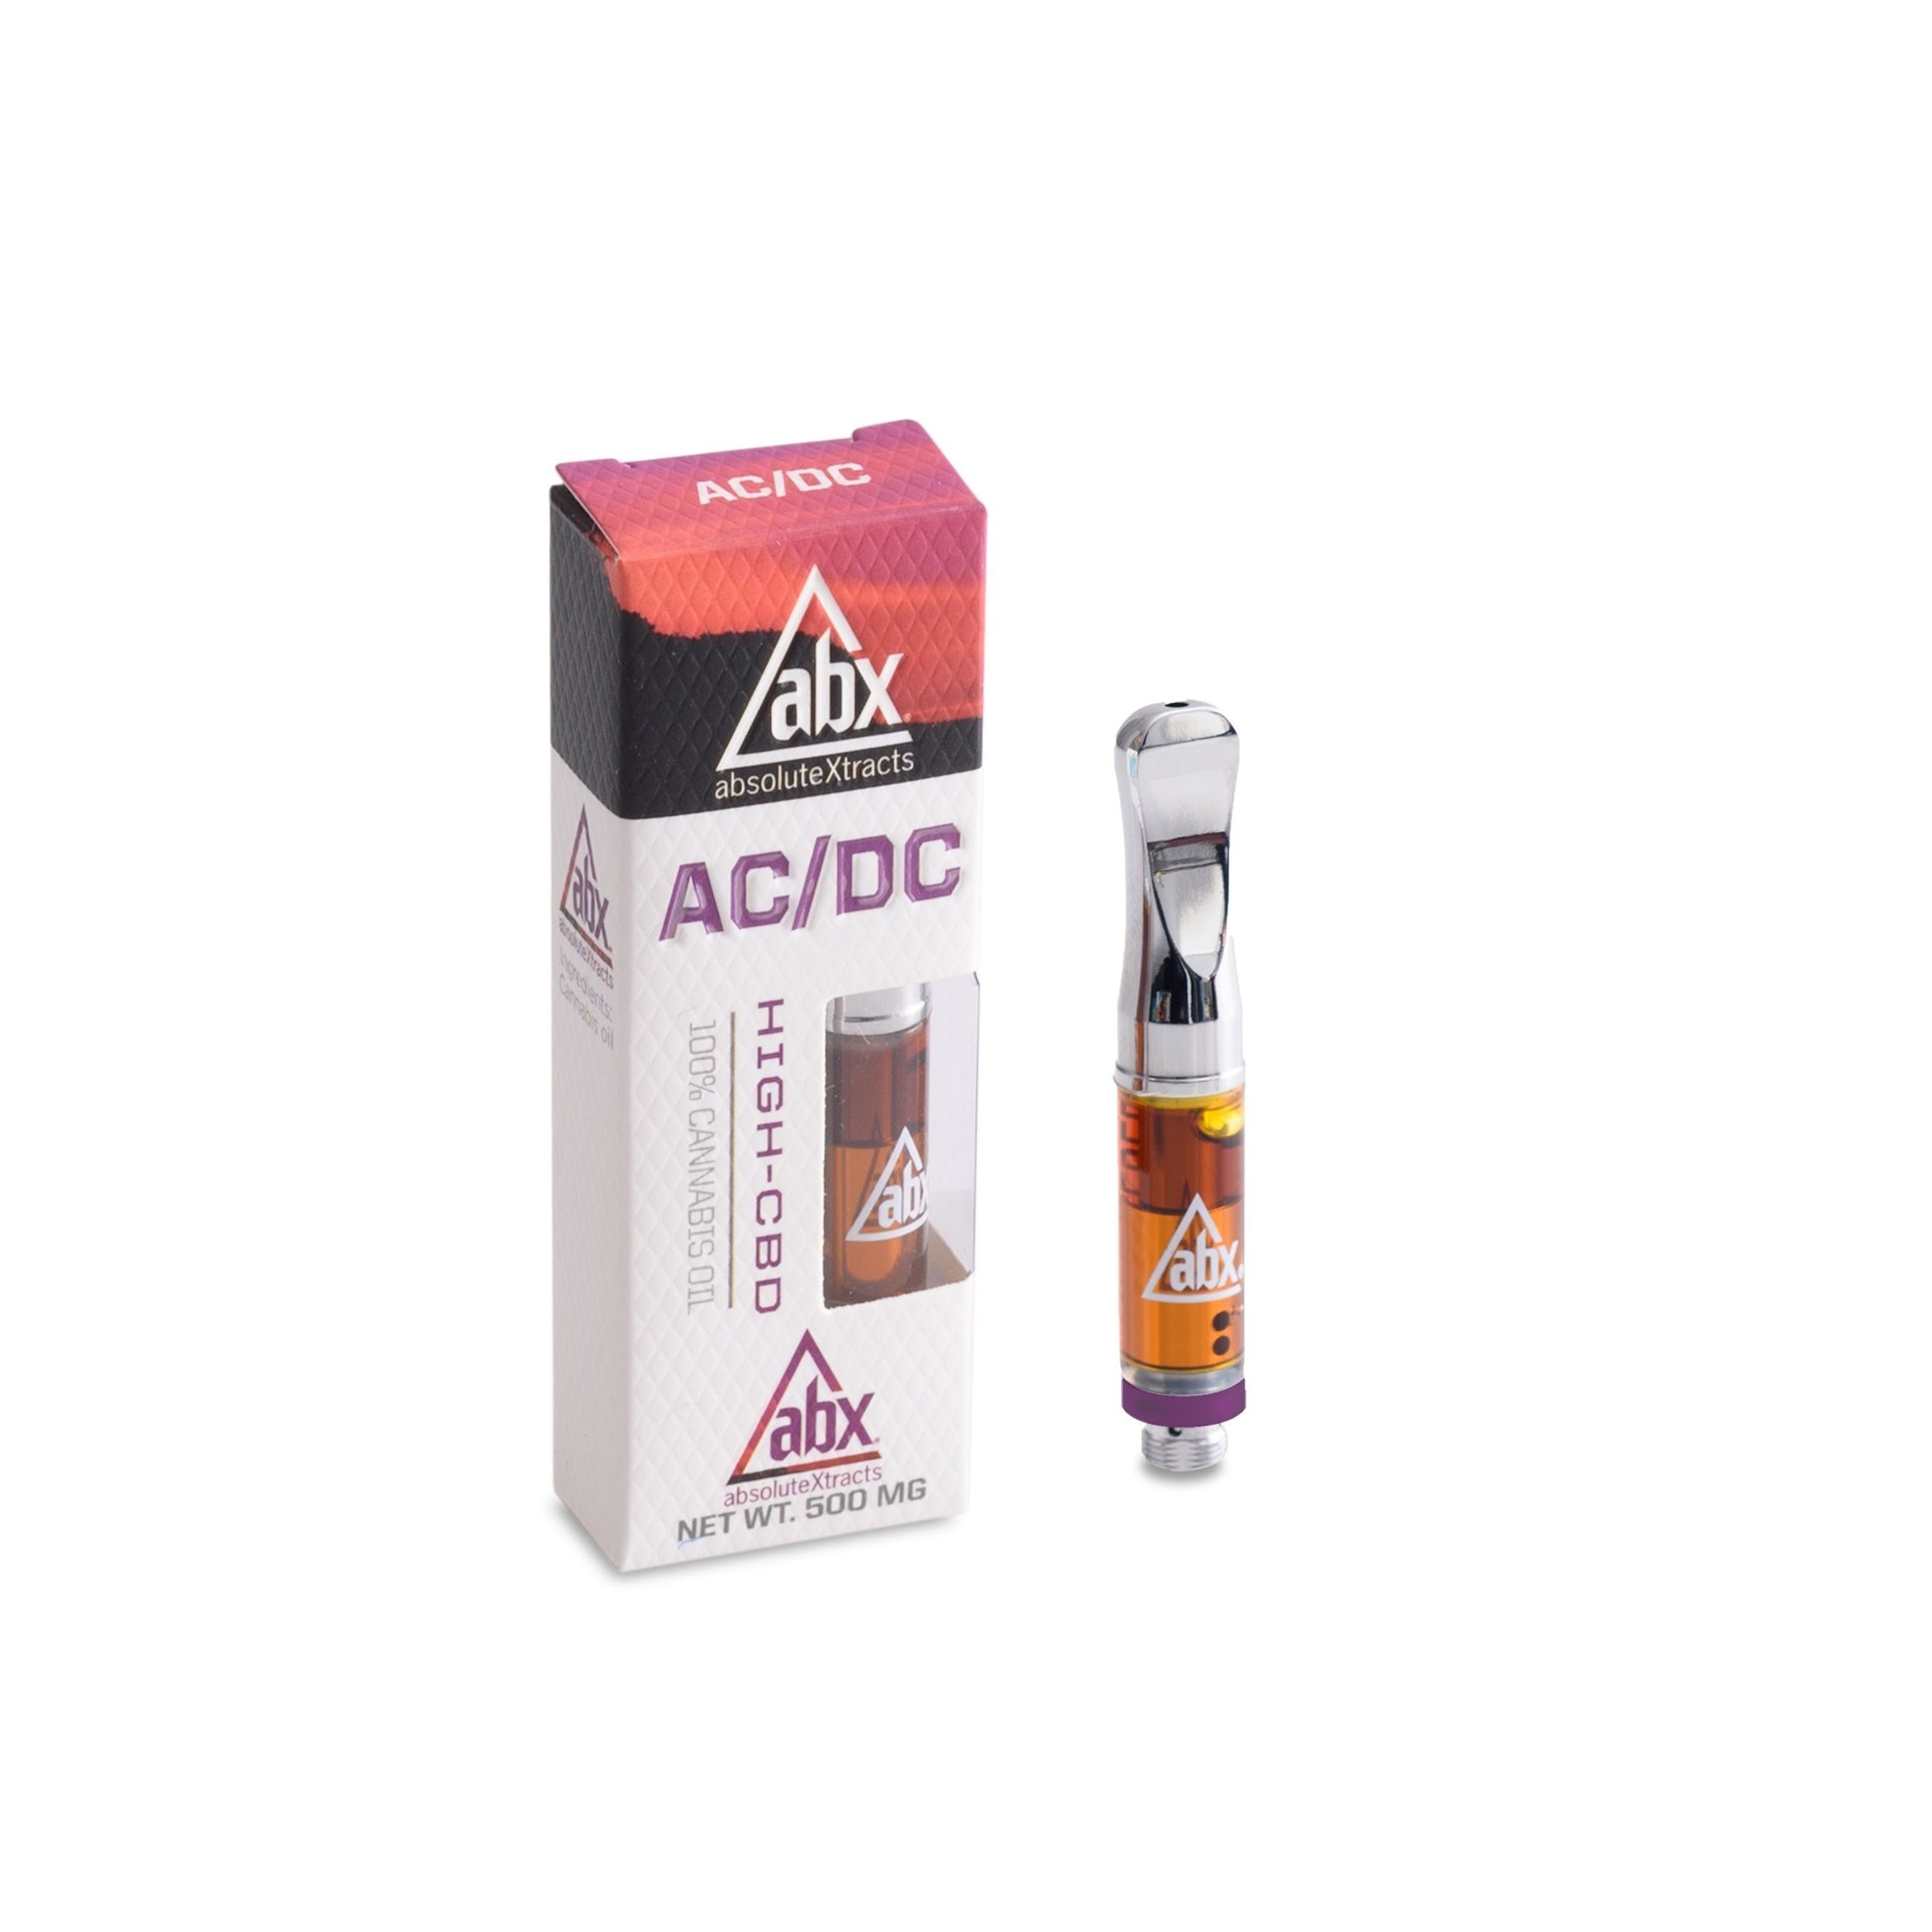 concentrate-abx-acdc